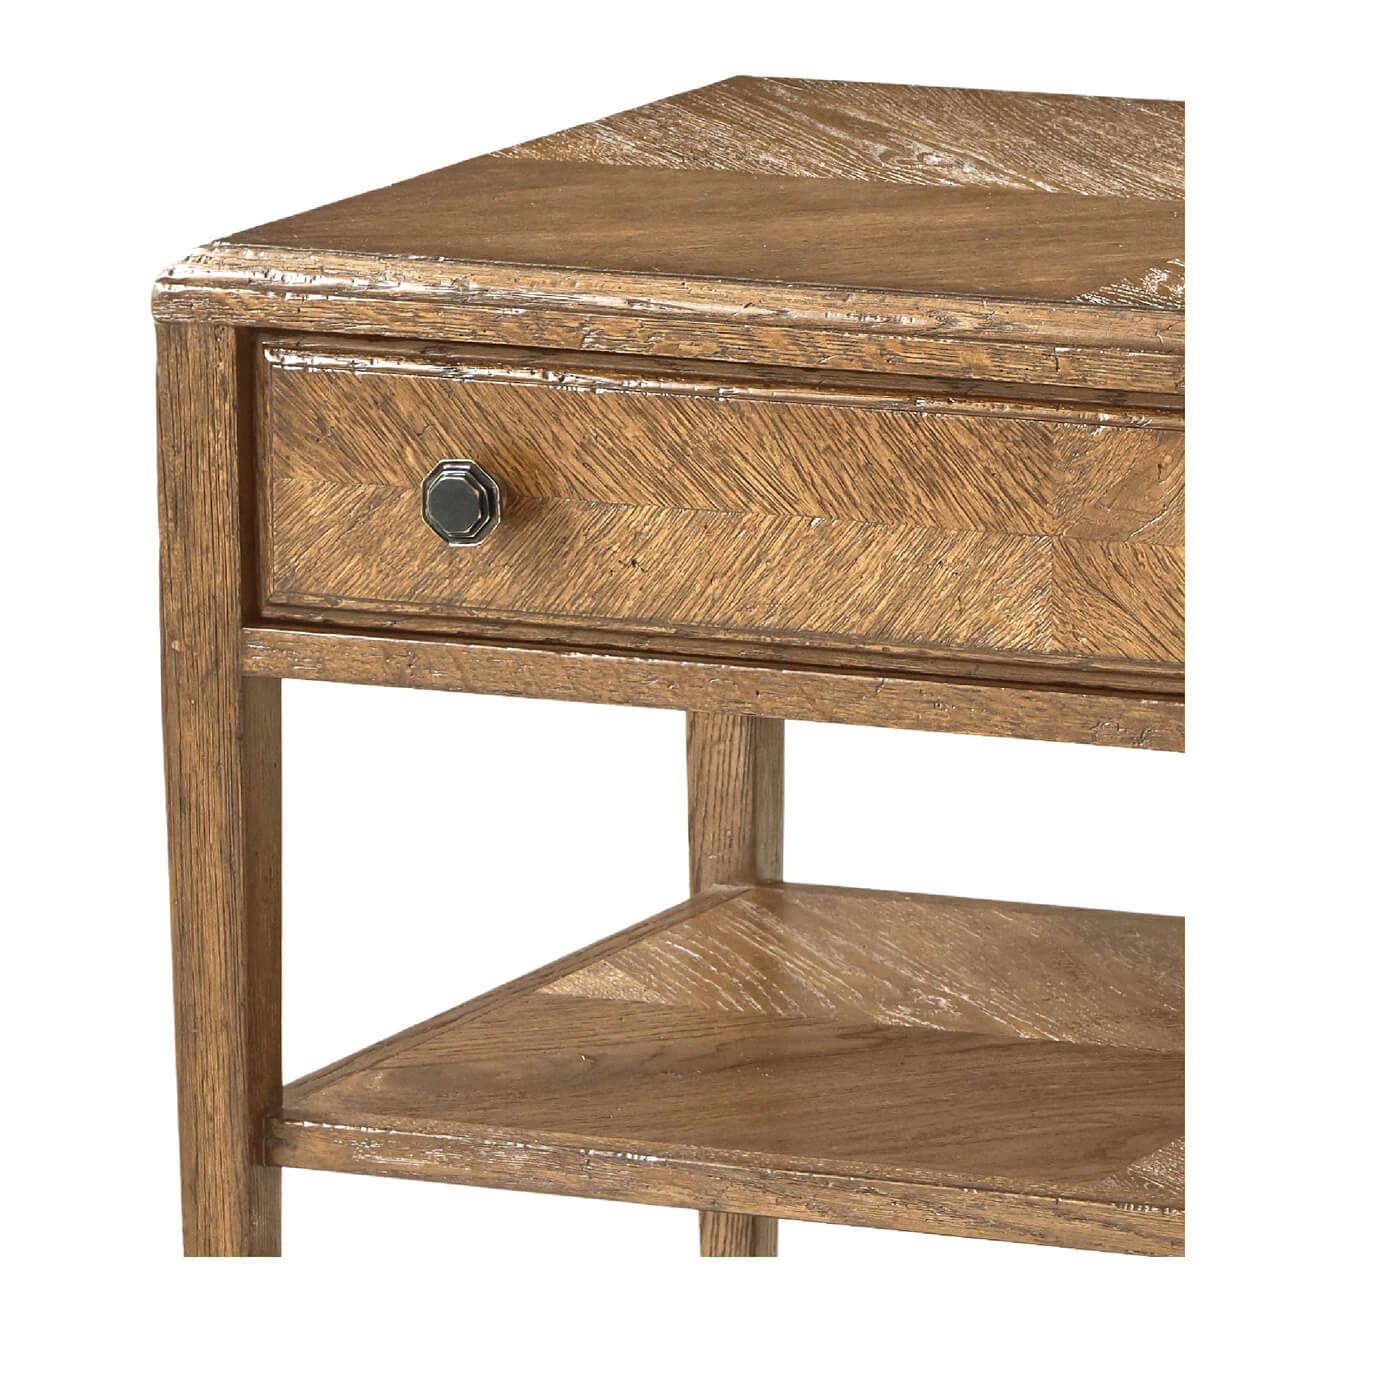 A Rustic oak two-tier nightstand with a light oak parquetry top that is mirrored on the two shelves below. It has one frieze drawer with a mirrored herringbone pattern and fine Verde Bronze handles.

Dimensions: 29